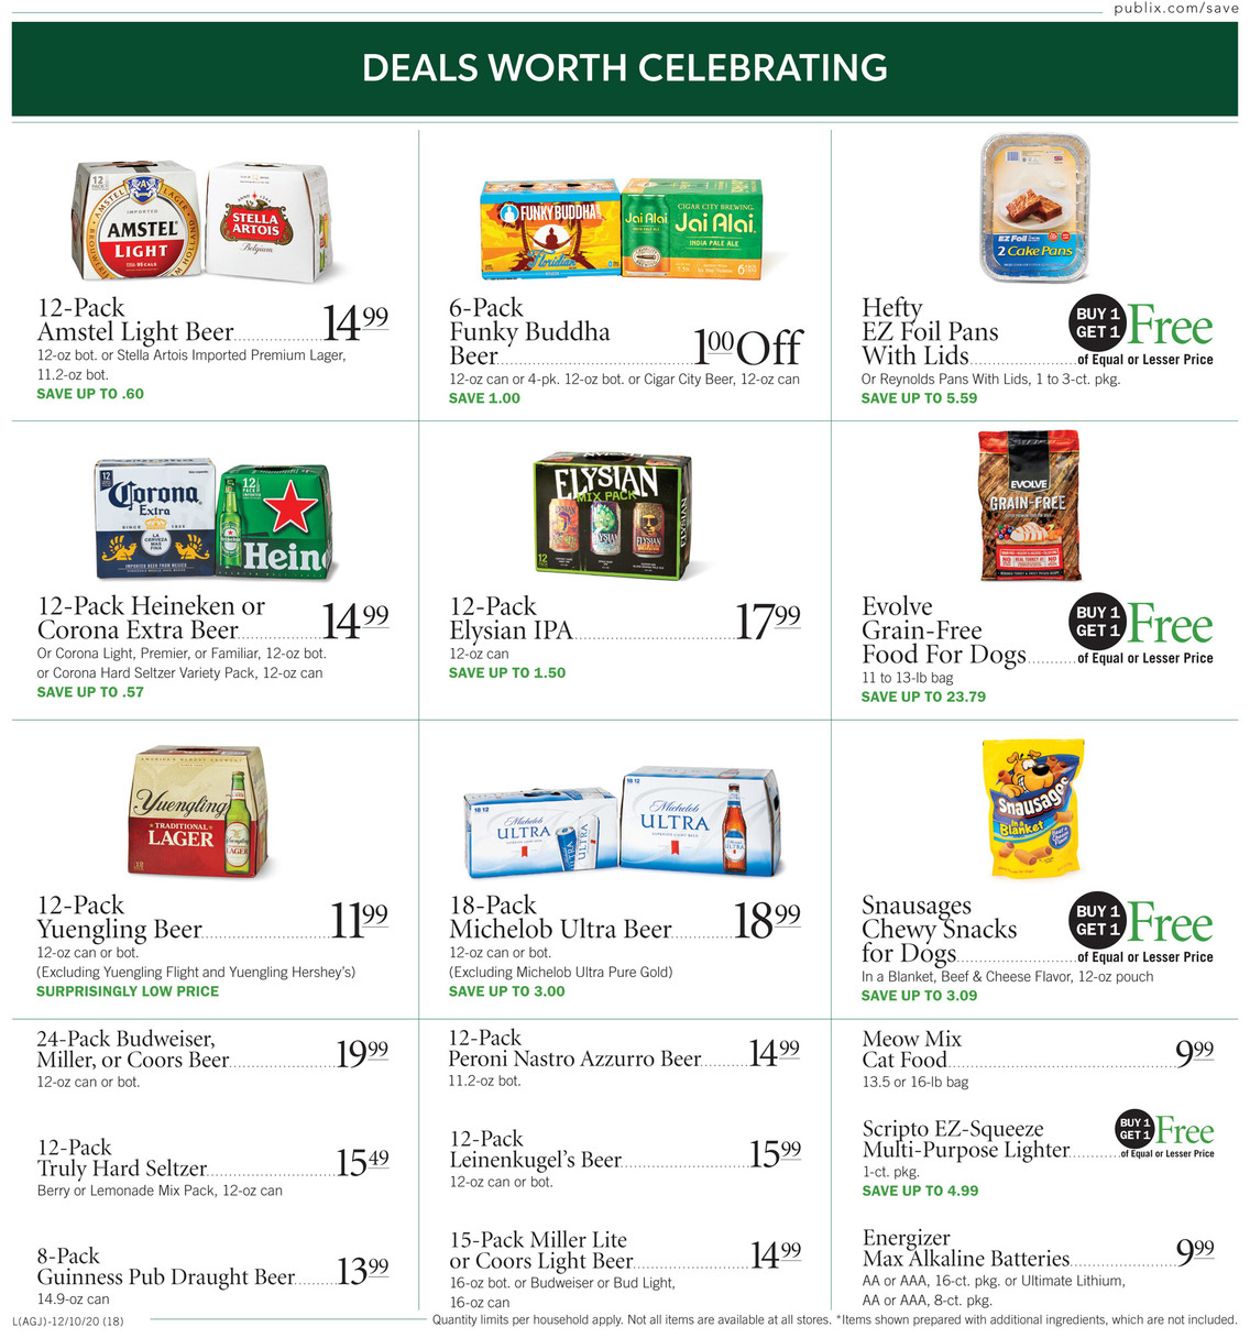 Catalogue Publix Holiday Helpers 2020 from 12/10/2020